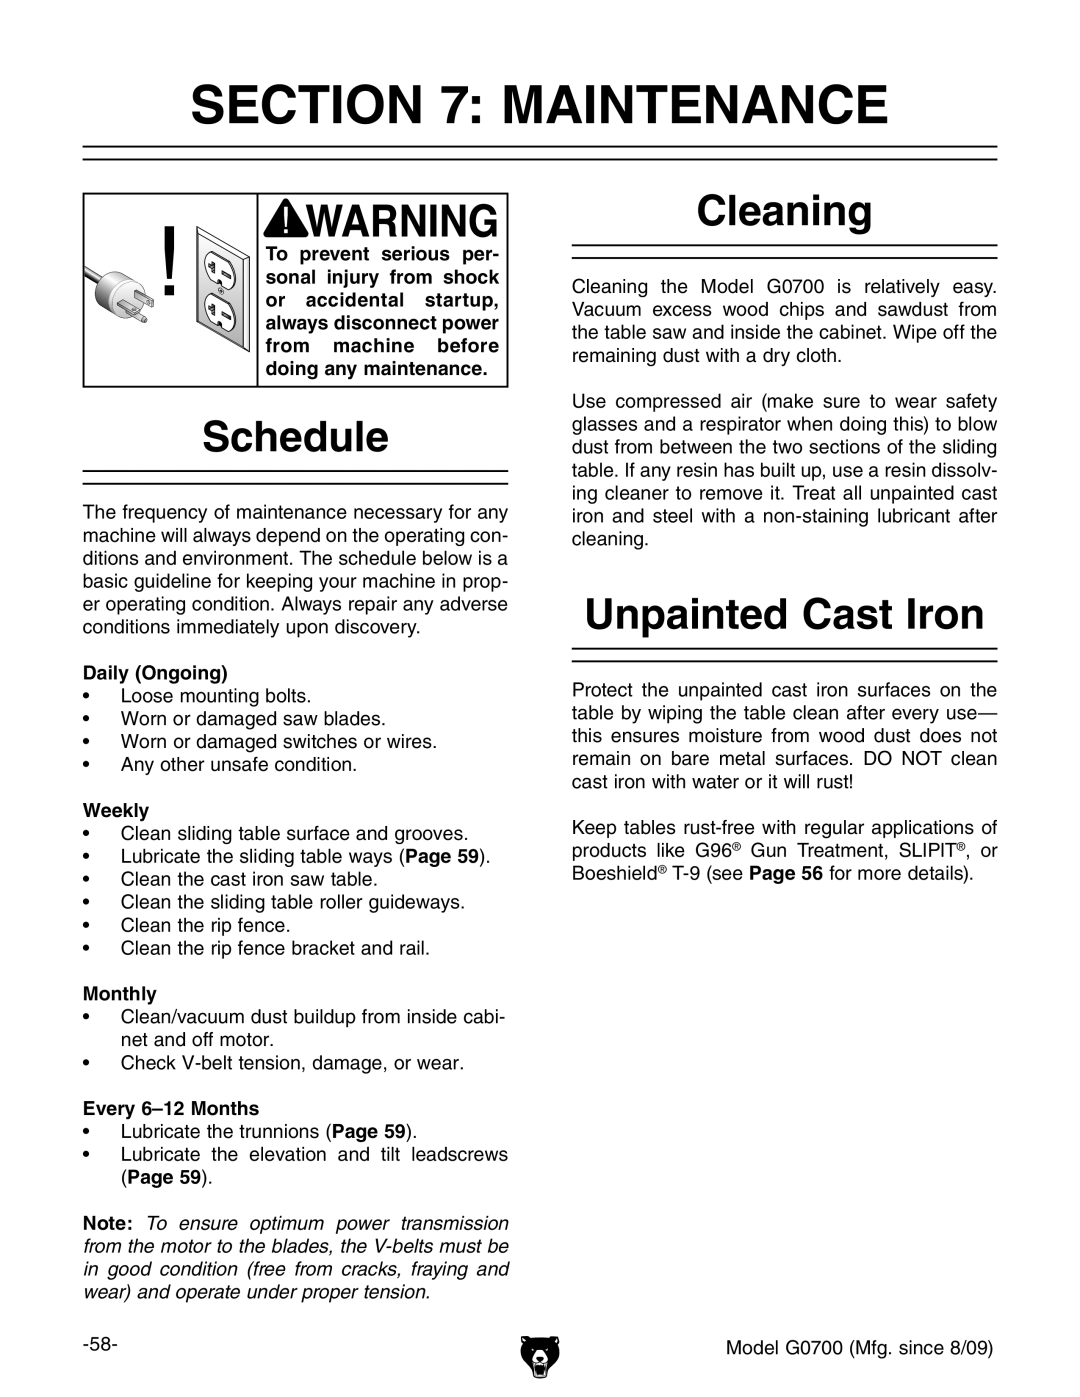 Grizzly G0700 owner manual Maintenance, Schedule, Cleaning, Unpainted Cast Iron 